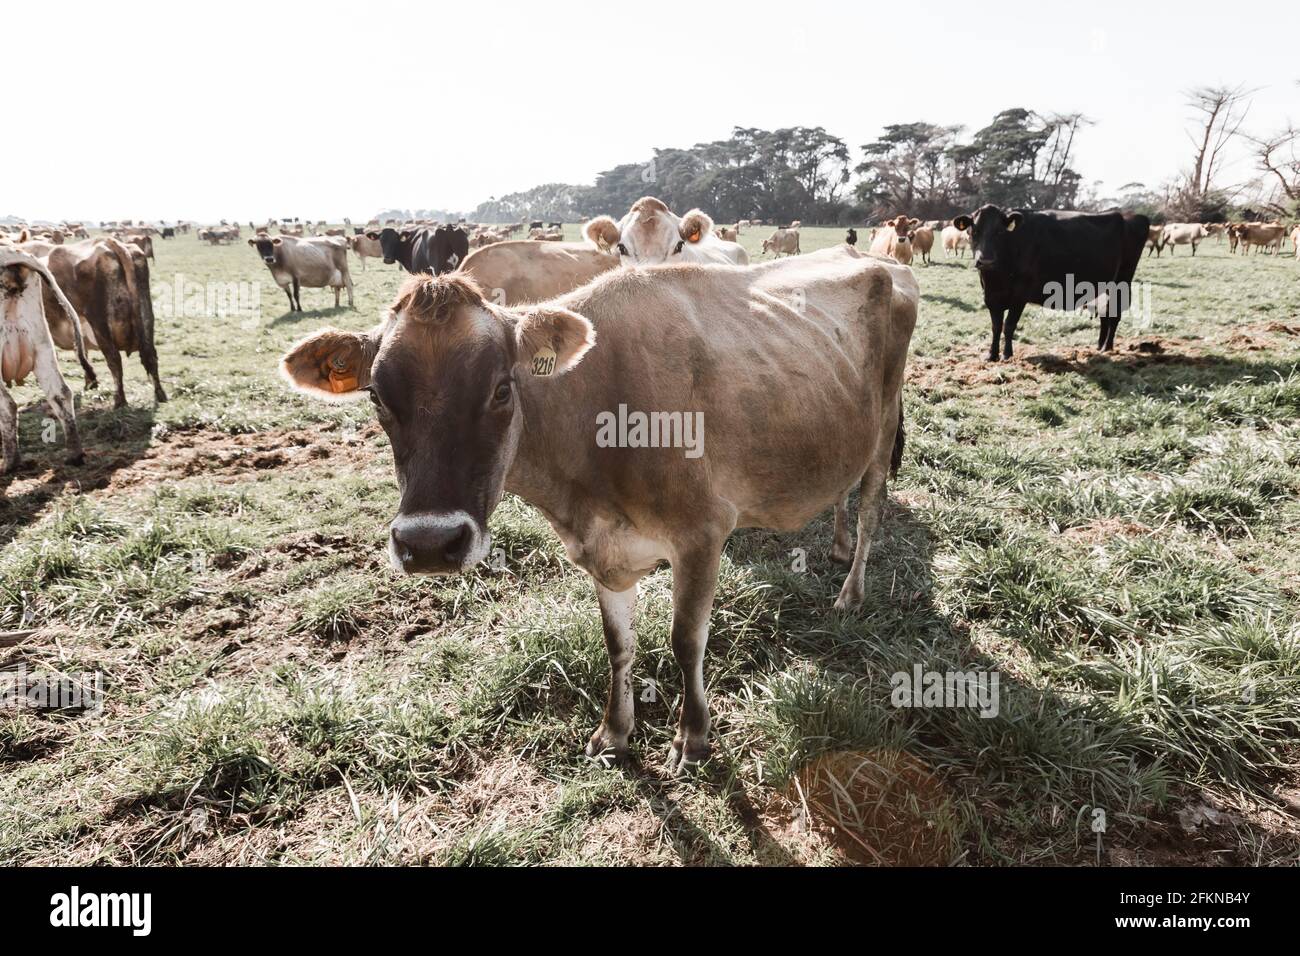 A jersey cow on a dairy farm with other cows in the foreground Stock Photo